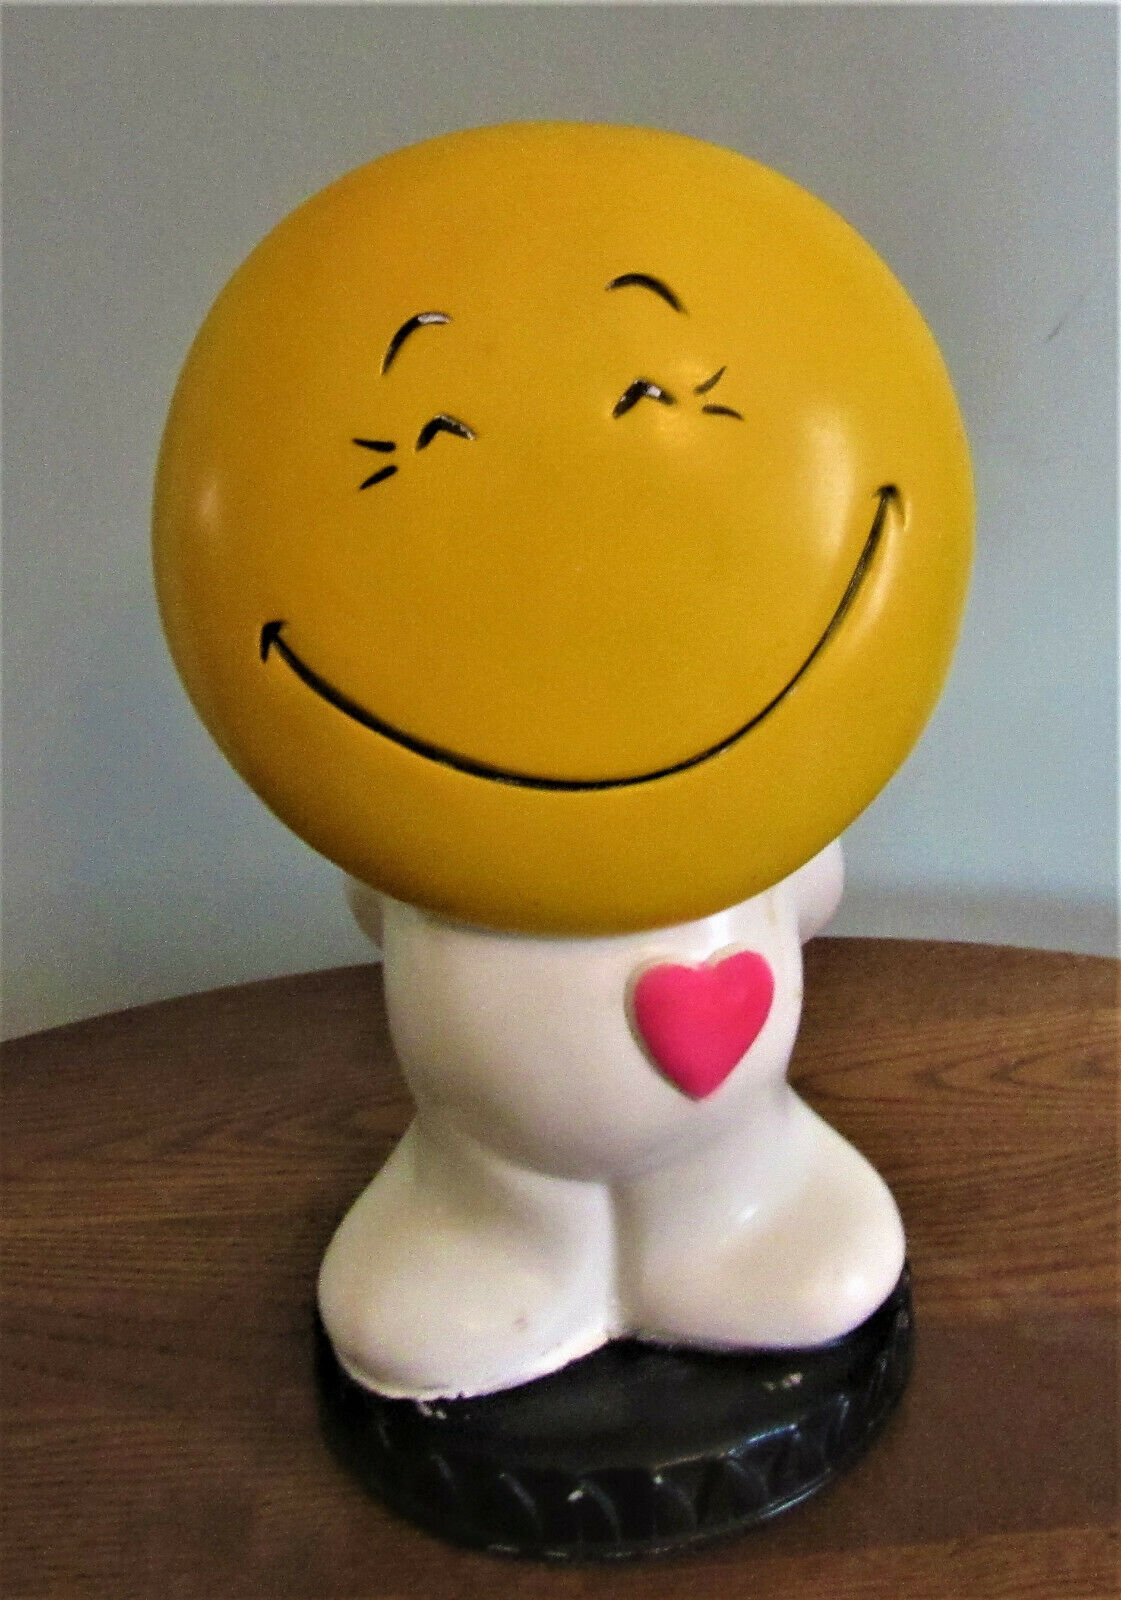 Sweet Vintage 1971 Play Pal Plastic Smiley Face Coin Bank, 50 Years Old!